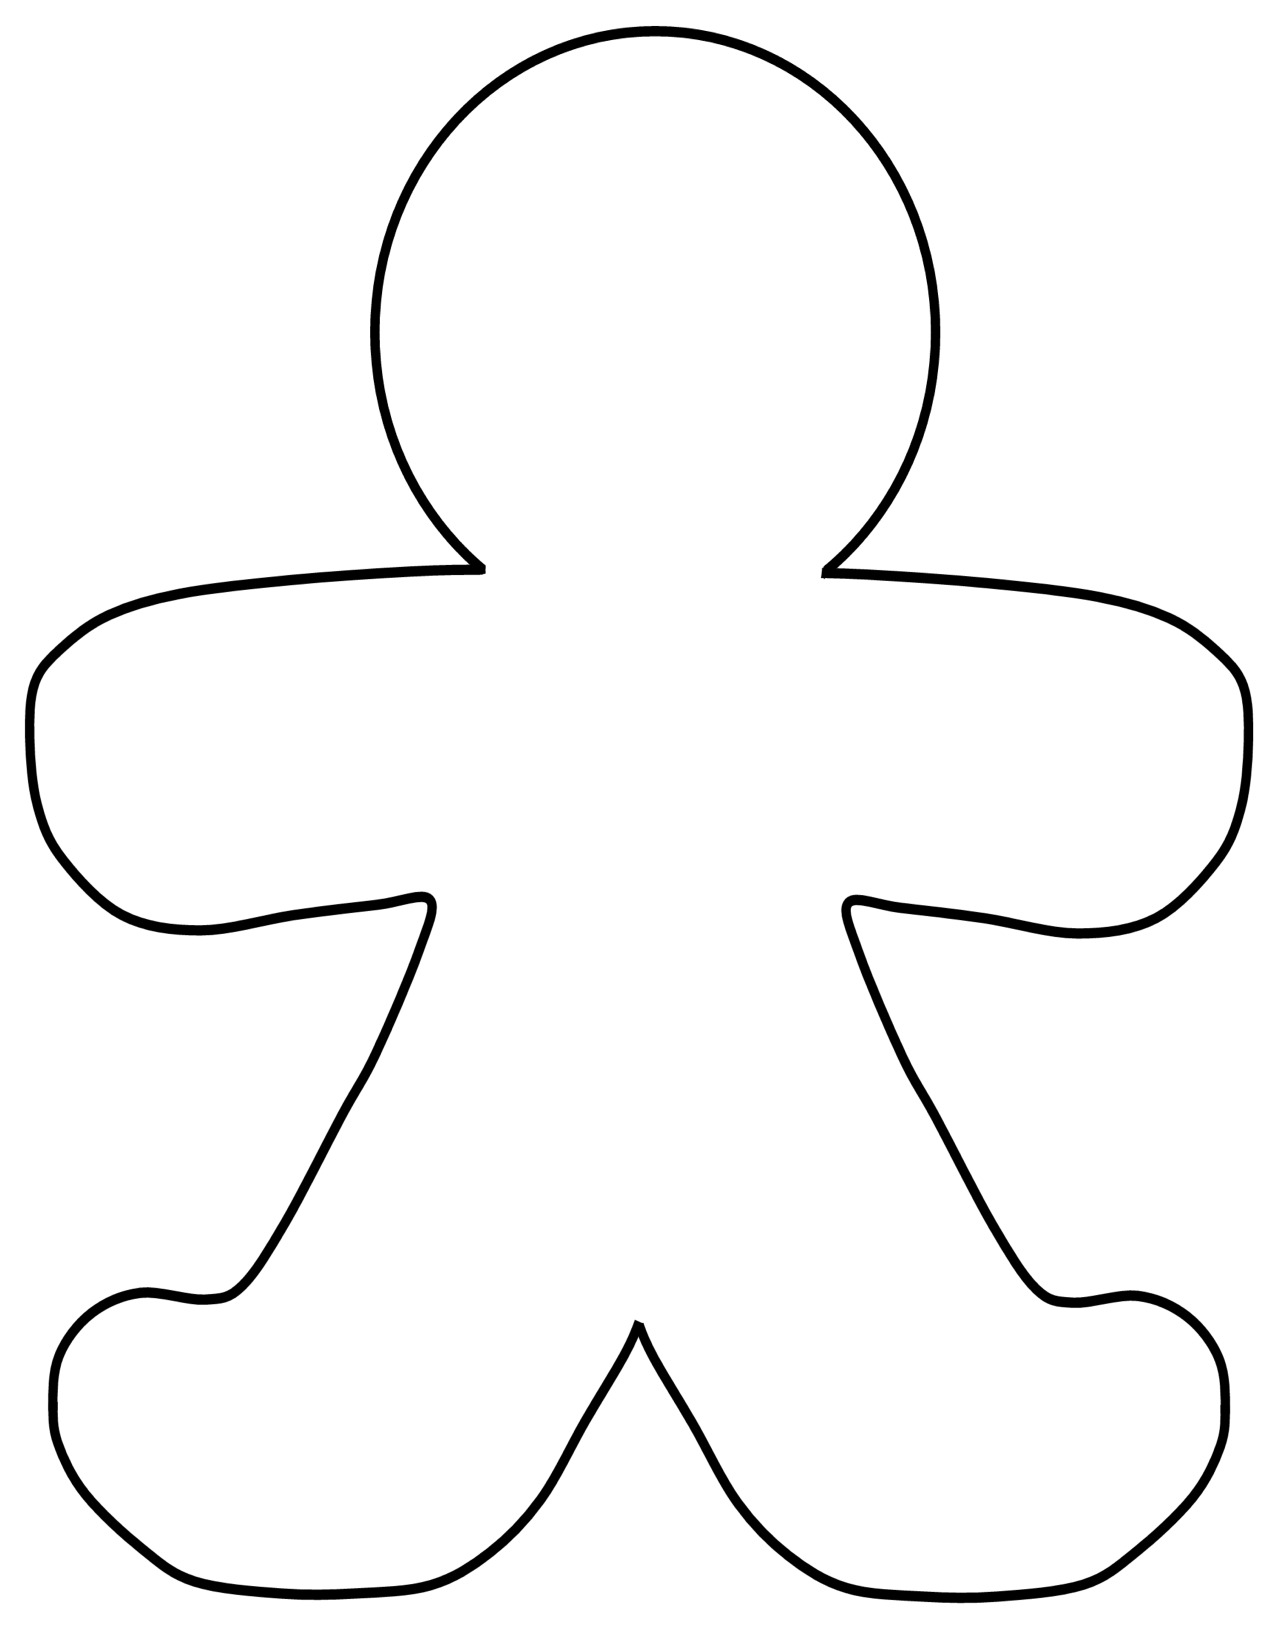 Person Outline Template - ClipArt Best